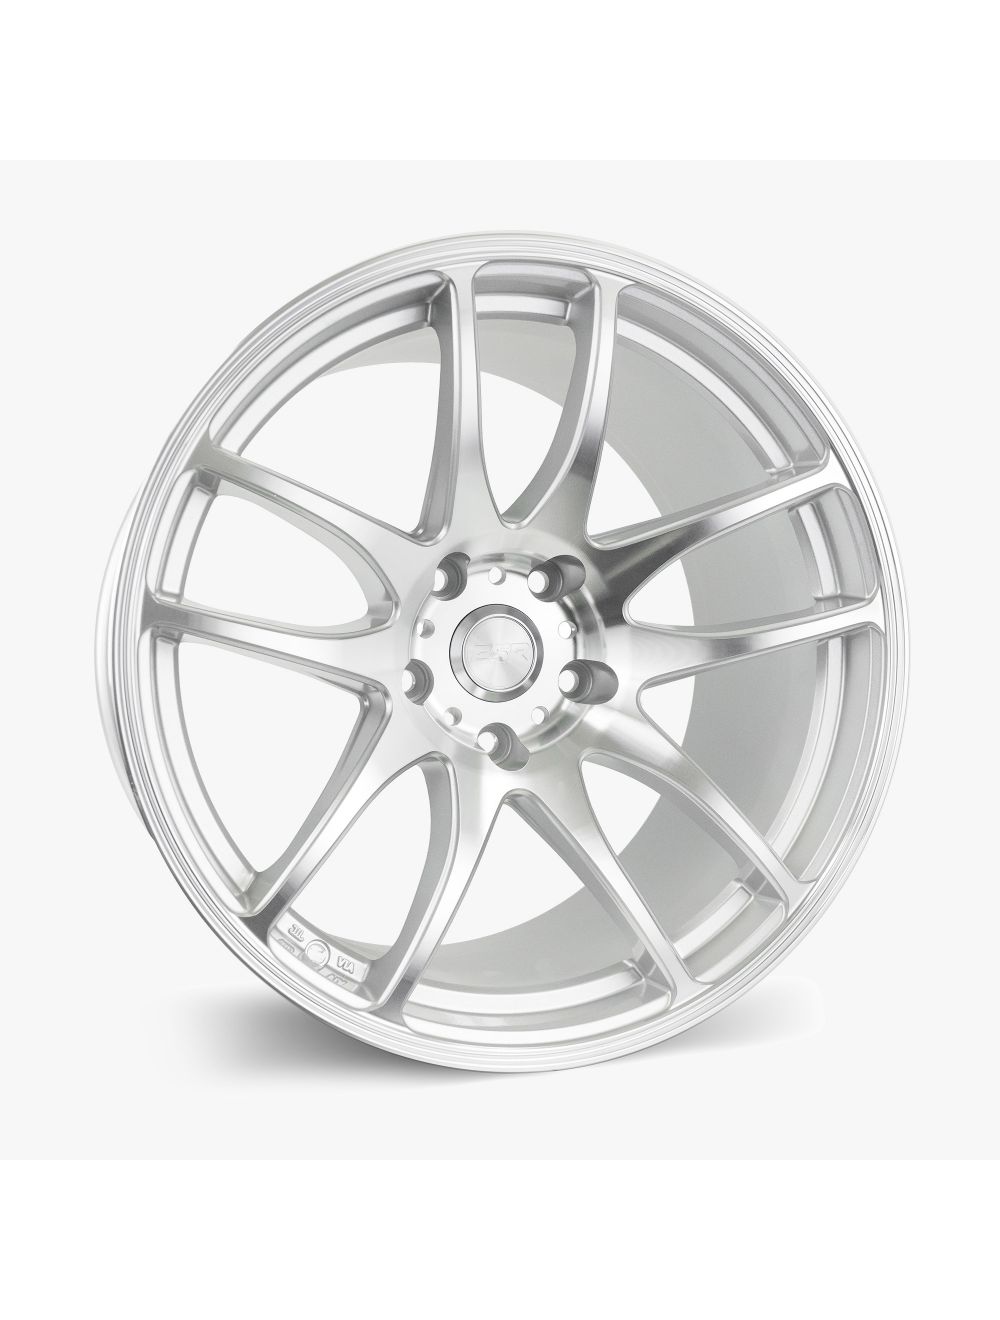 ESR SR08 HYPER SILVER WITH MACHINED FACE AND MACHINED LIPWHEELS | 17X8.5 | 5X120 | OFFSET: 30MM | CB: 72.6MM